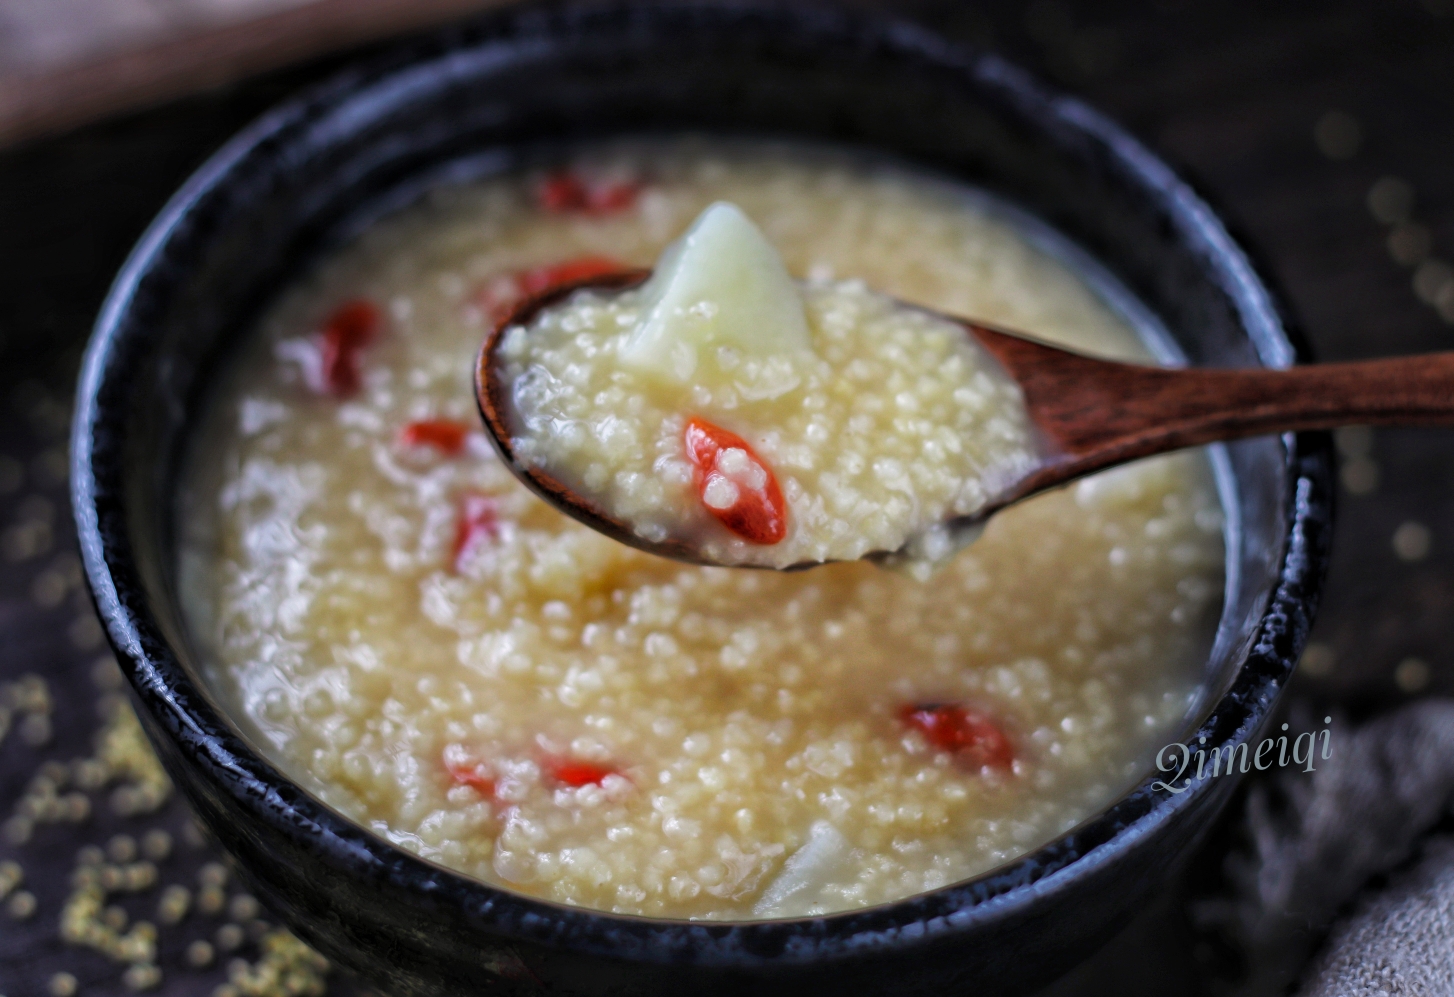 
This congee, the autumn wants tipple, raise a stomach be good at lienal neither by accident, nutrition good drink, raise the person's way than eating the meat